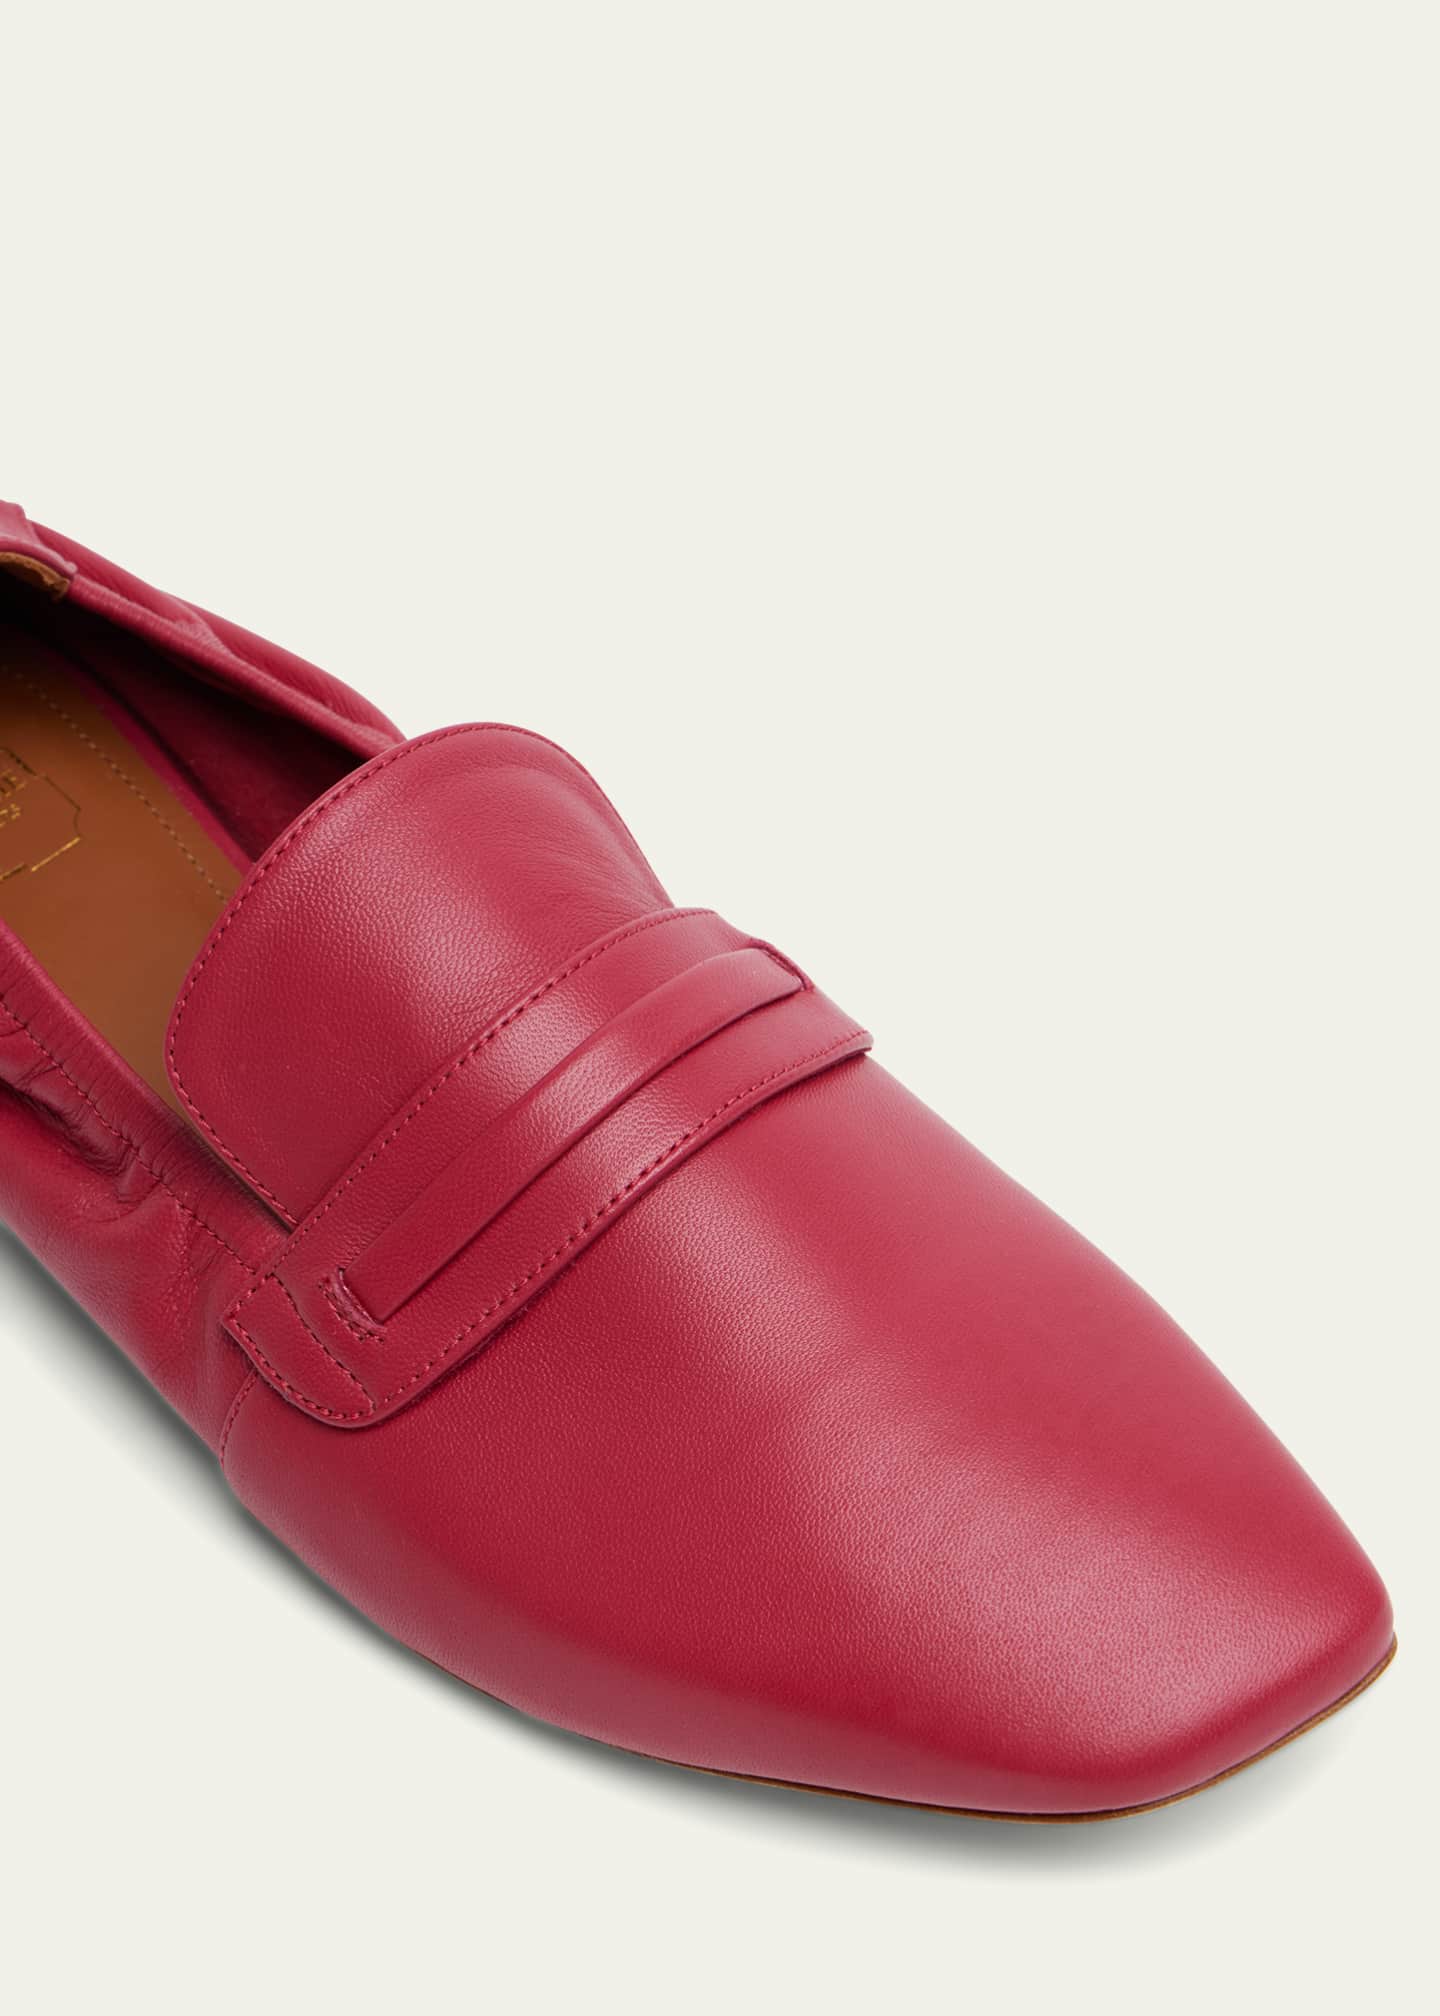 Souliers Napa Ballerina Loafers - Bergdorf